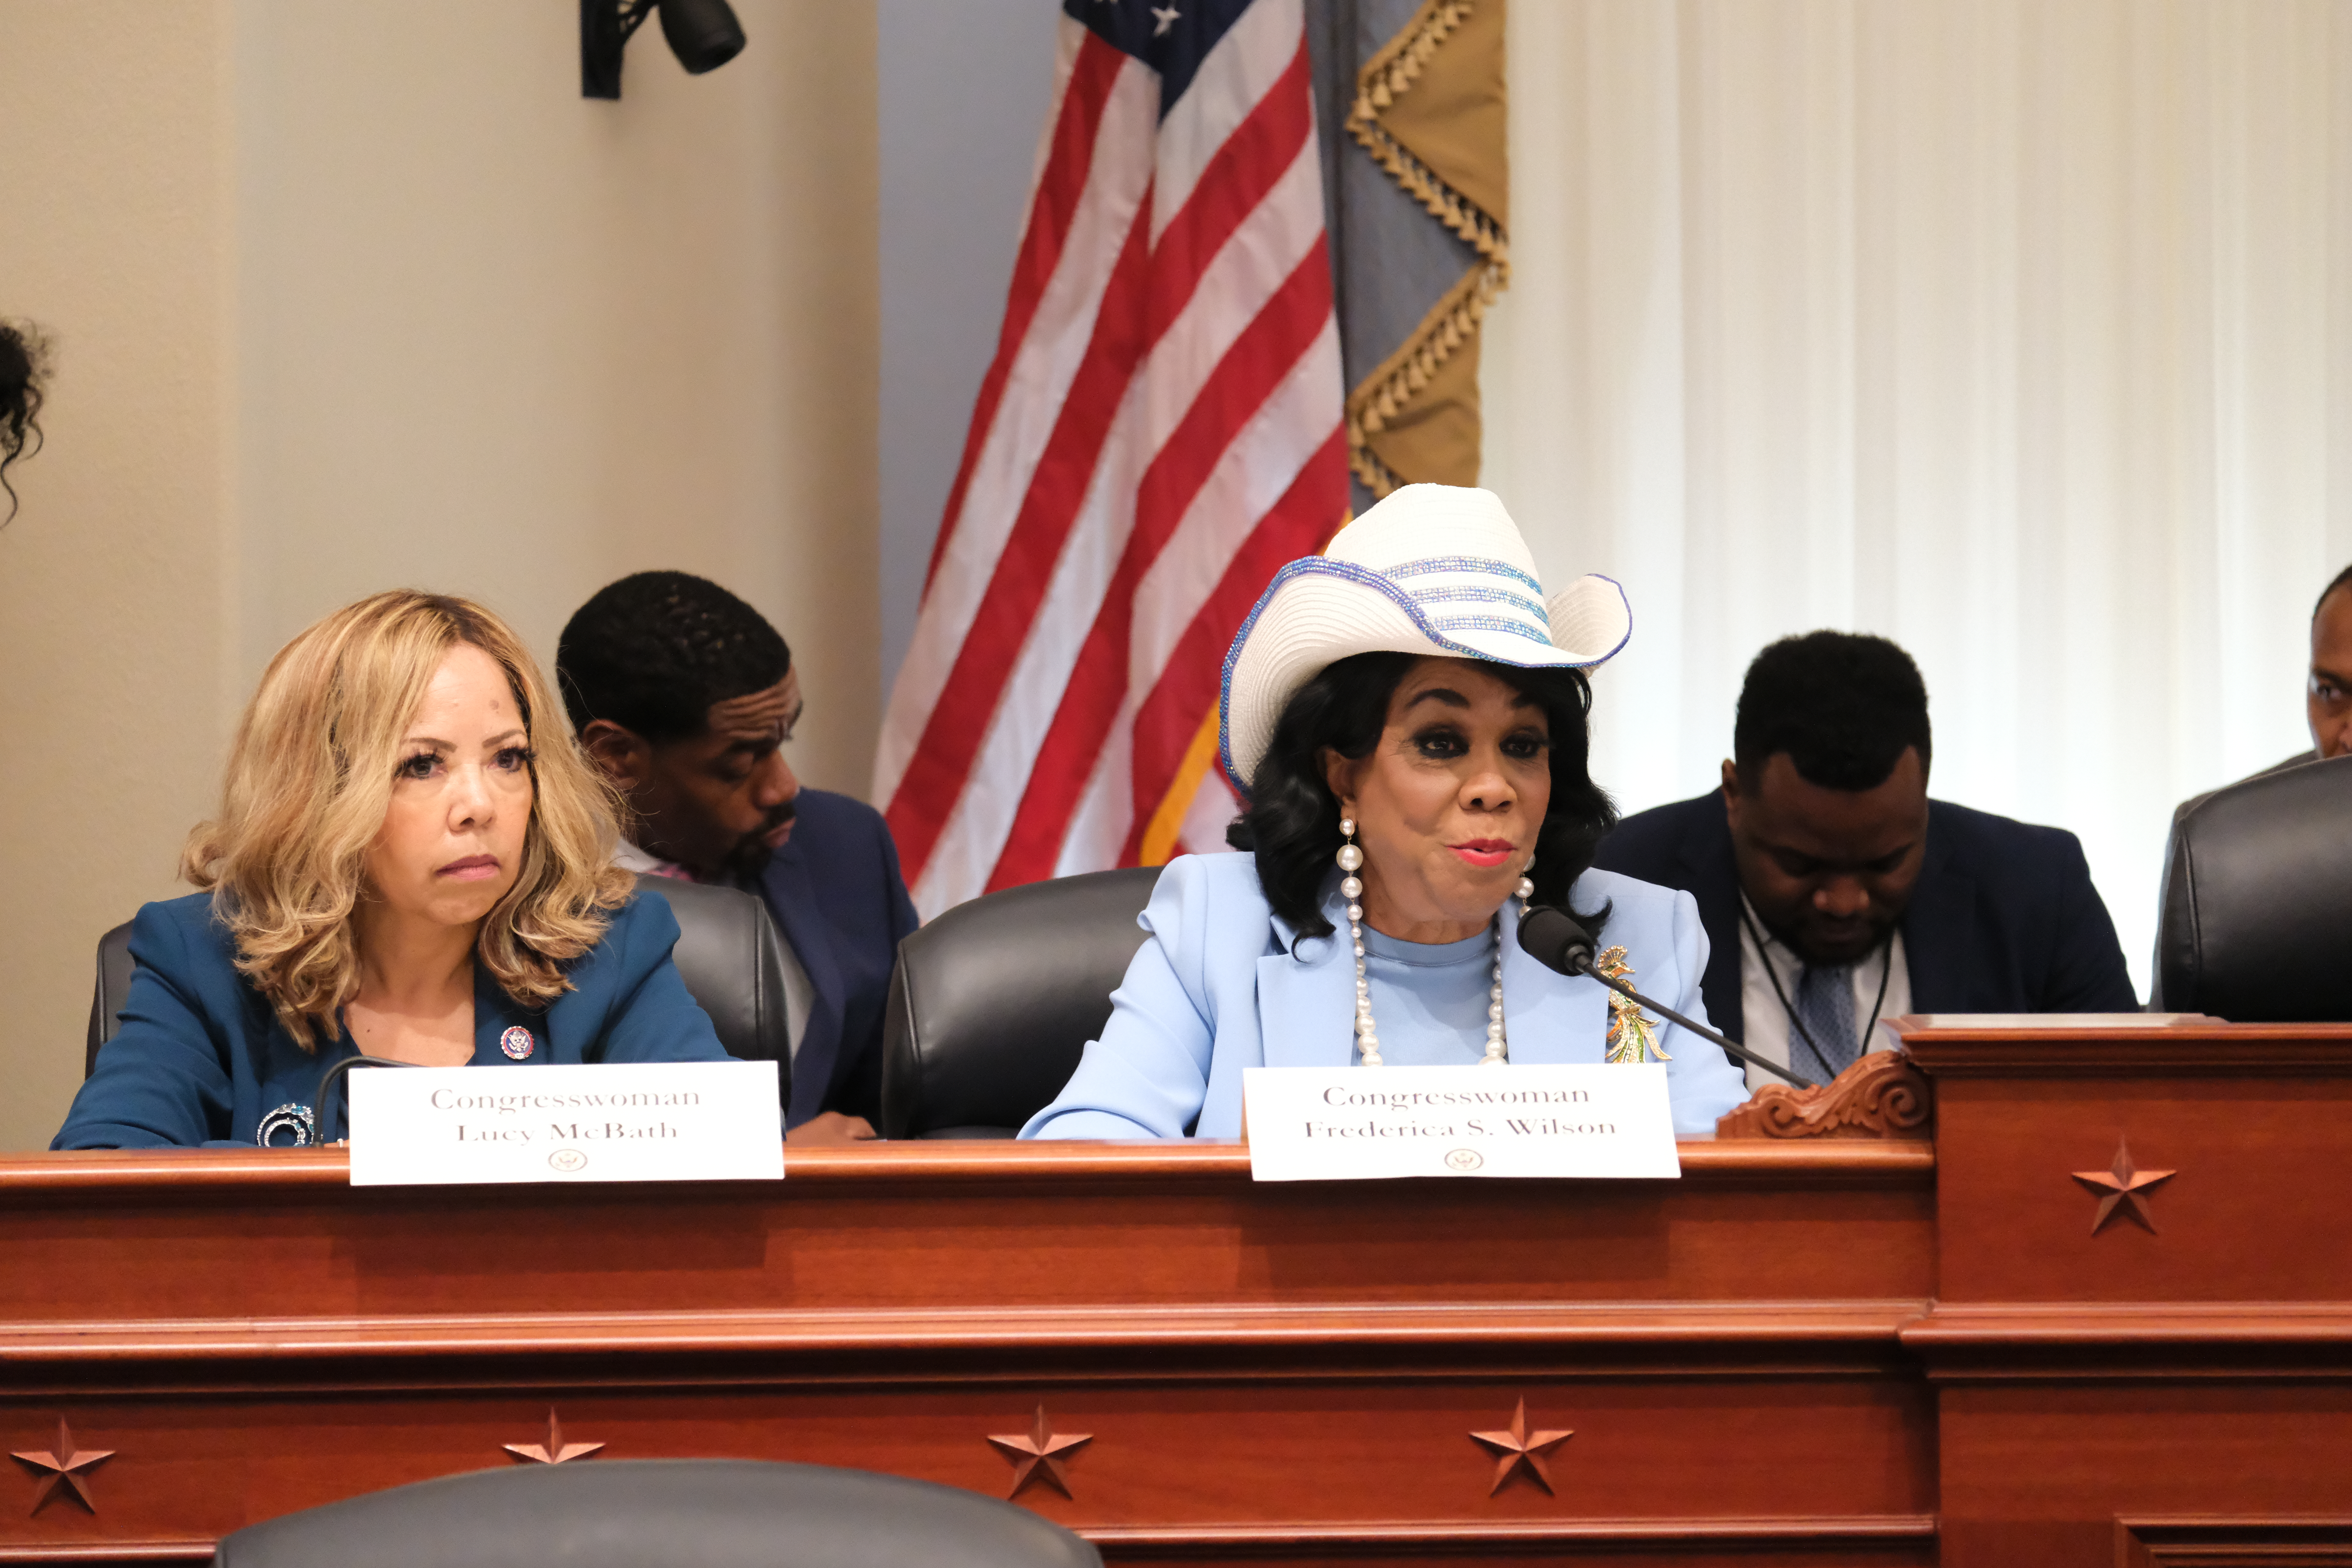 Rep. Lucy McBath and Rep. Frederica Wilson